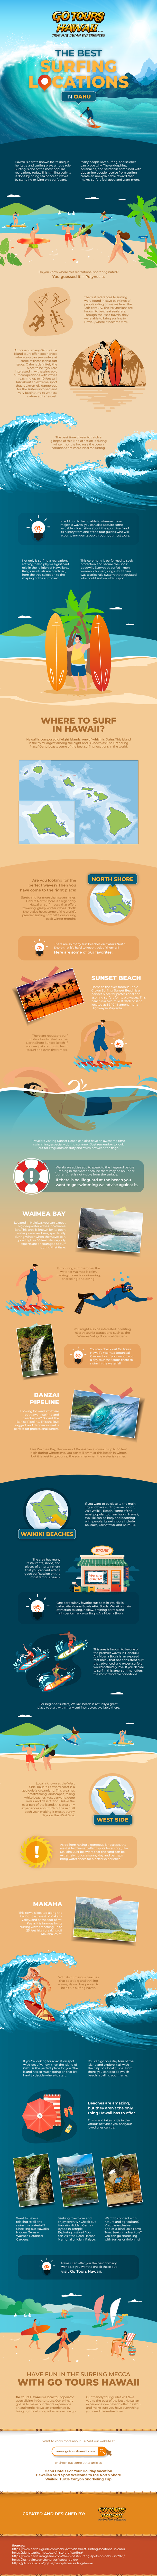 The-Best-Surfing-Locations-in-Oahu-Infographic-Image-HUDSa52